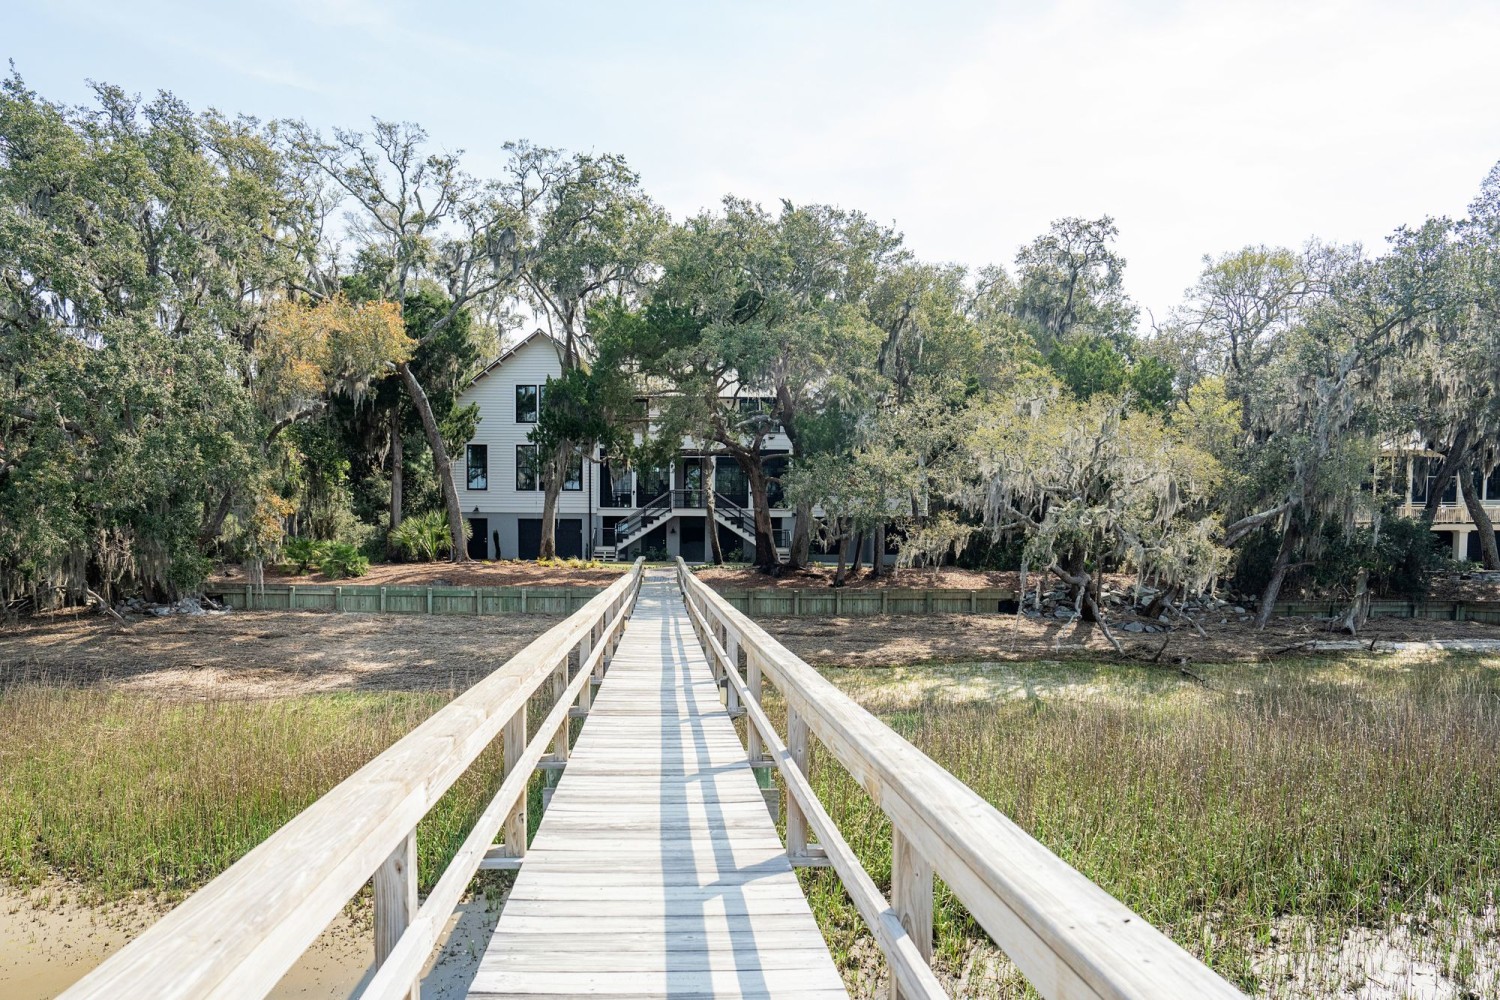 Bill and Rhonda Anderson built this 5,000-square-foot home along the Beaufort River in South Carolina.